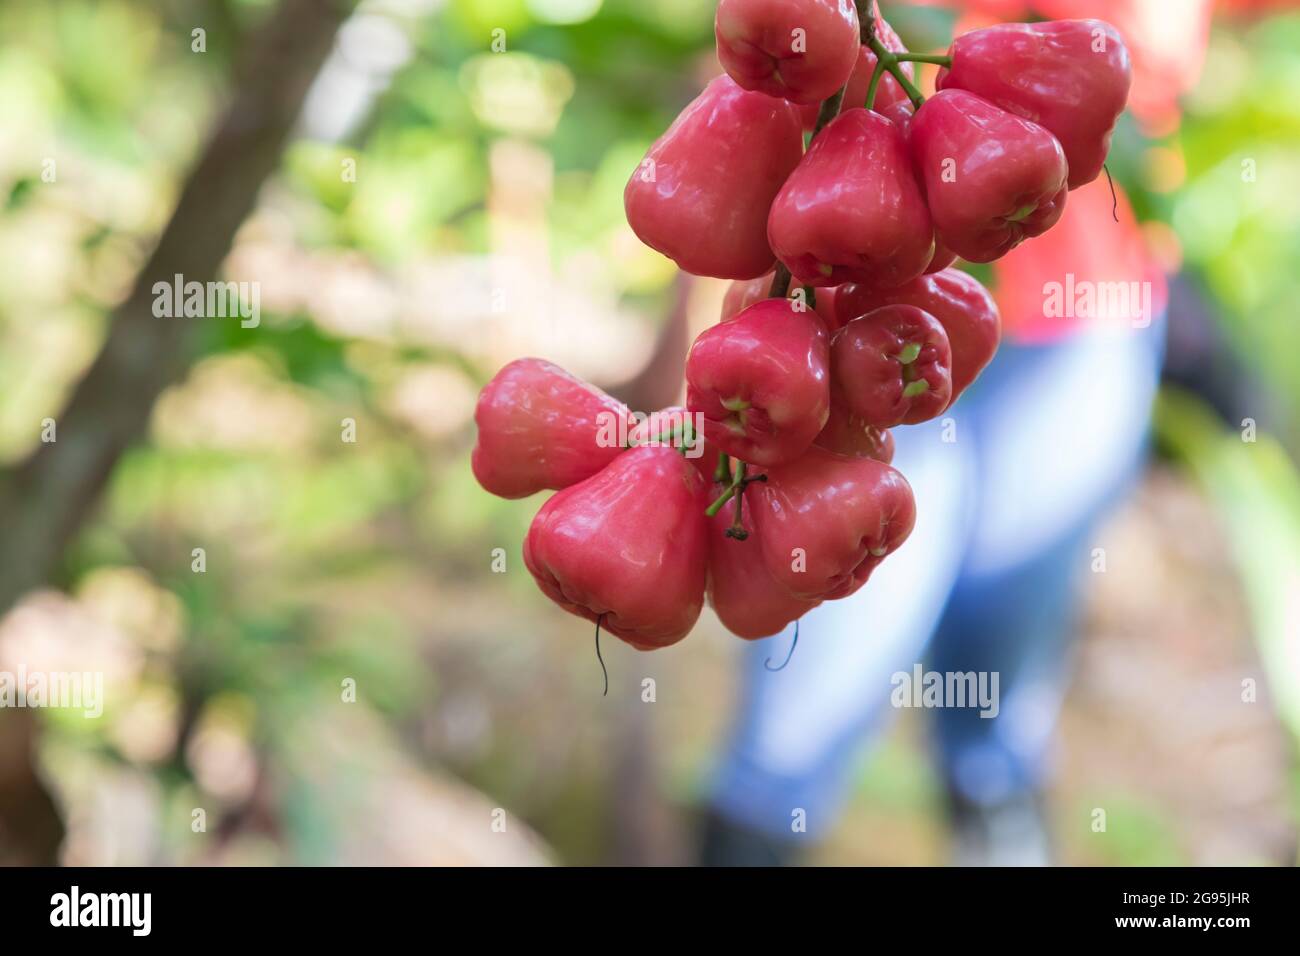 A cluster of wax apples, rose apples, wax jambus, lianwu fruits Stock Photo